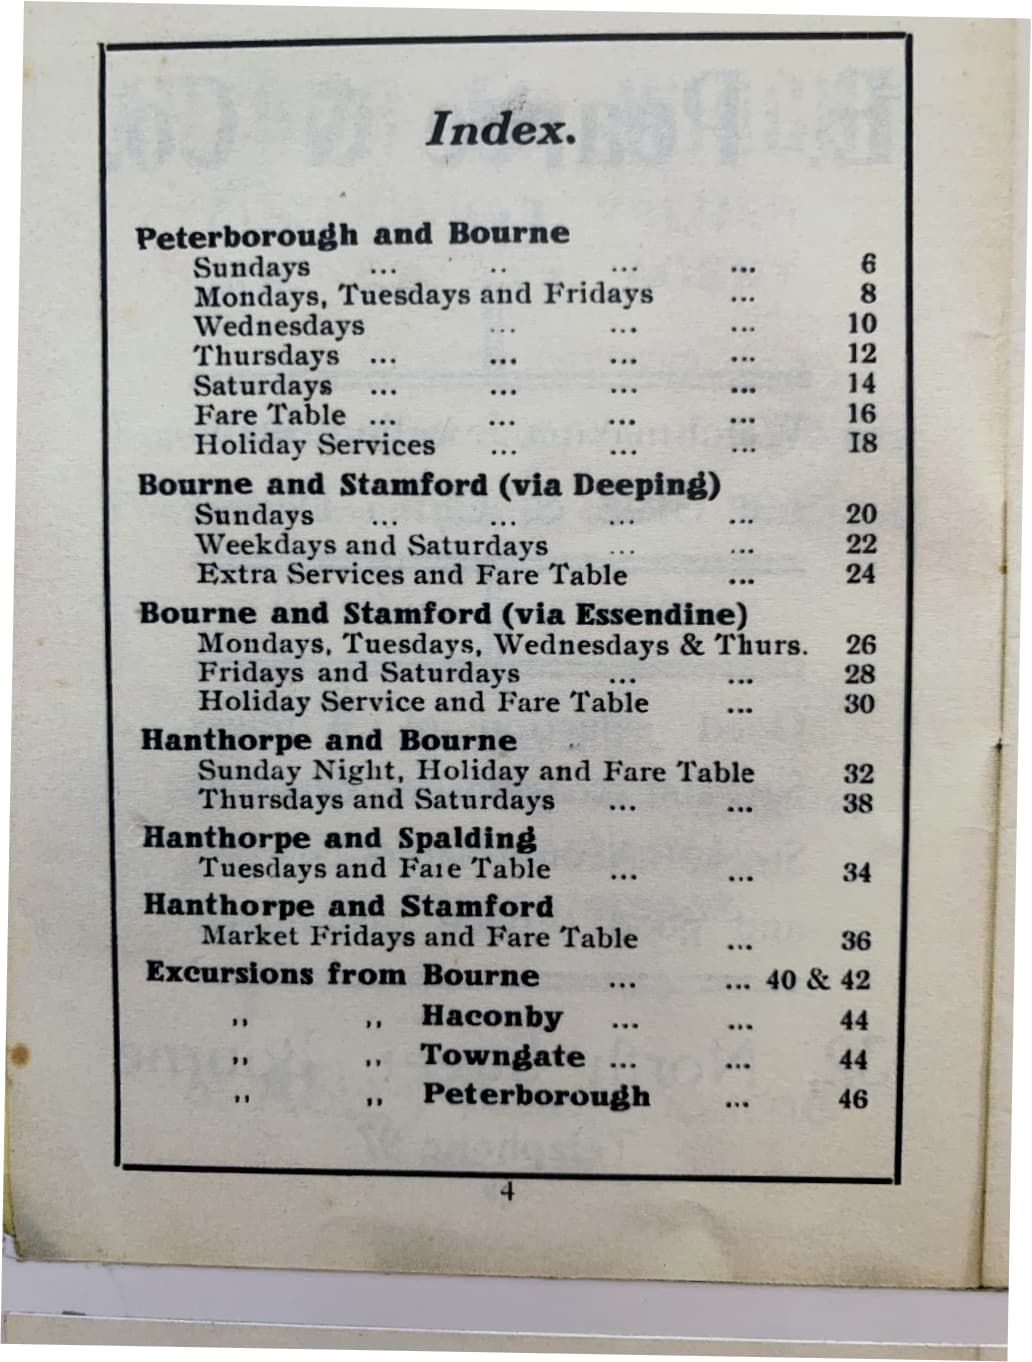 list of routes from 1938 timetable